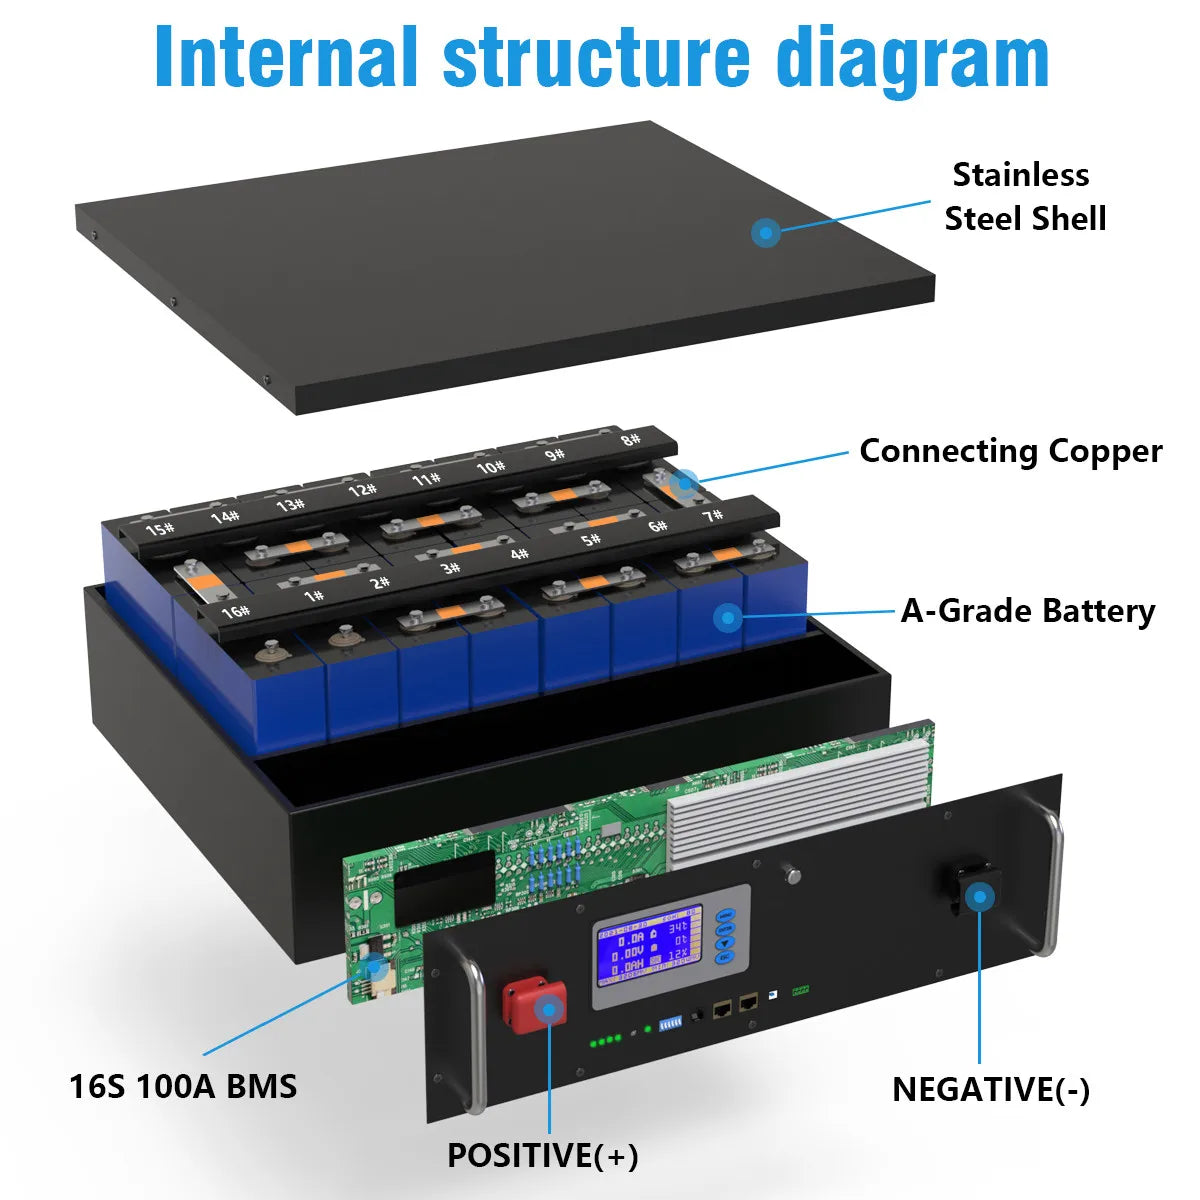 LiFePO4 48V 3KW Battery, Internal structure diagram with stainless steel shell, copper connections and A-grade battery components.